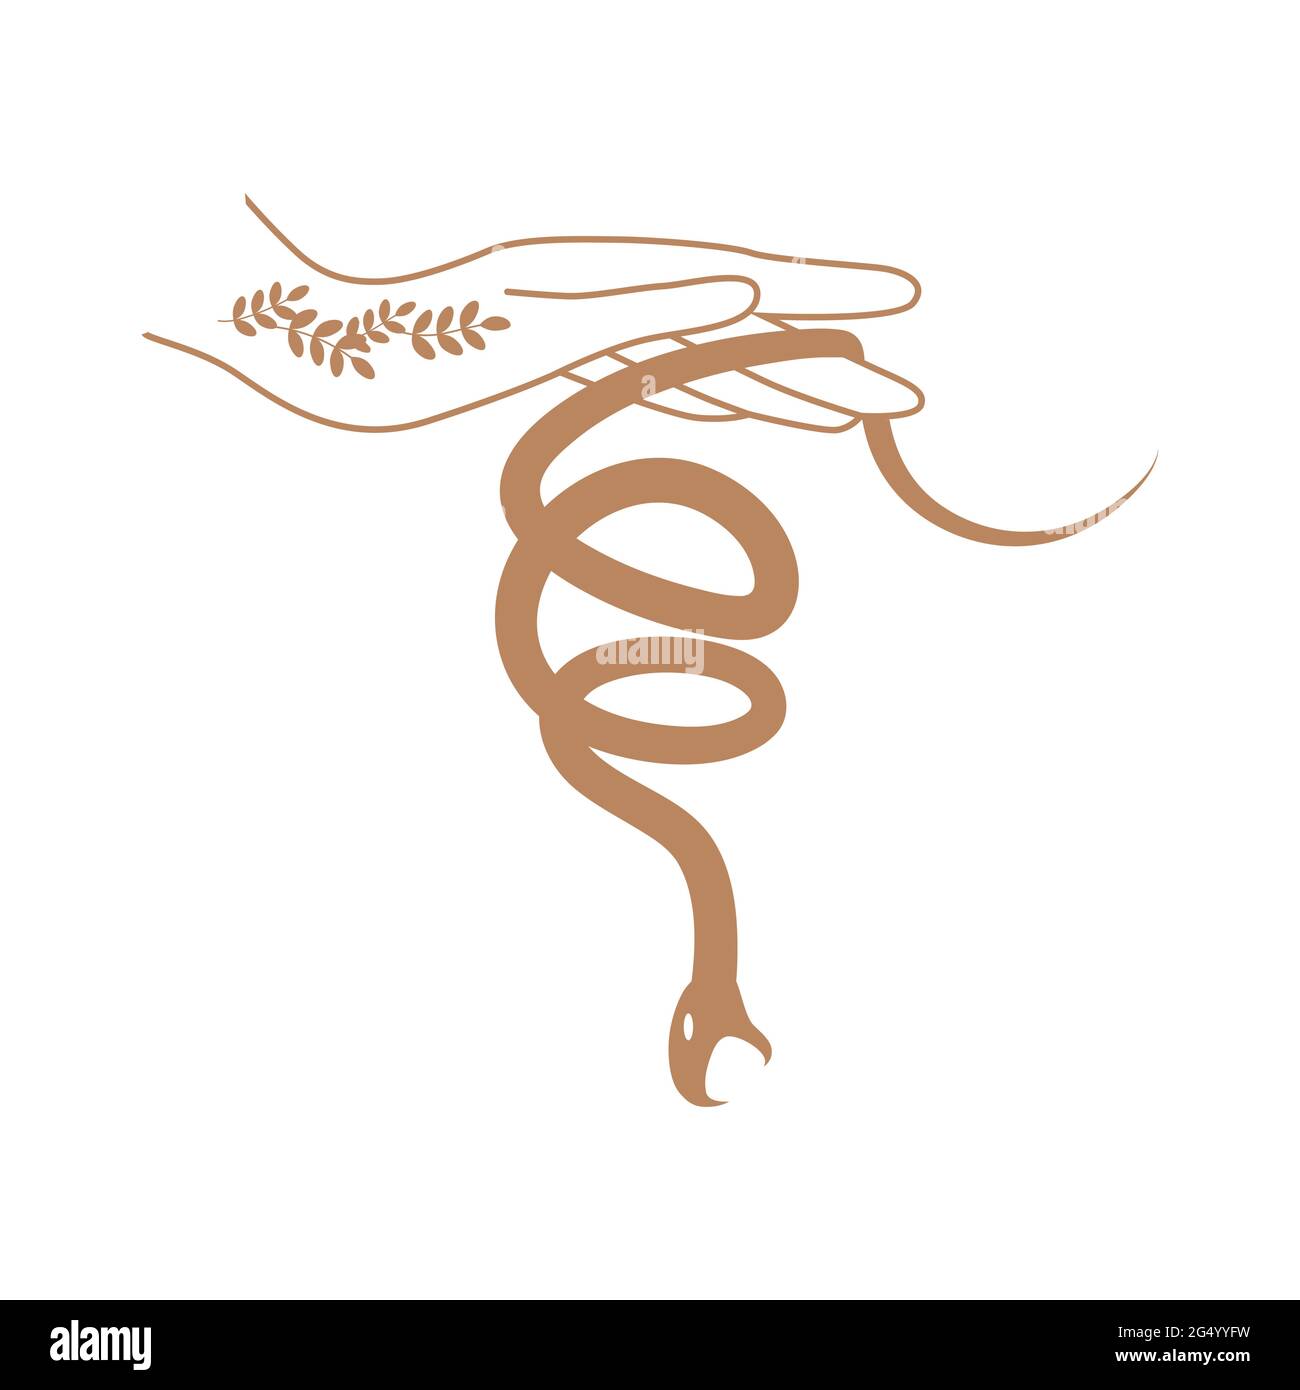 Esoteric symbol. Mystical and magical design with a magical snake on the hand Stock Vector